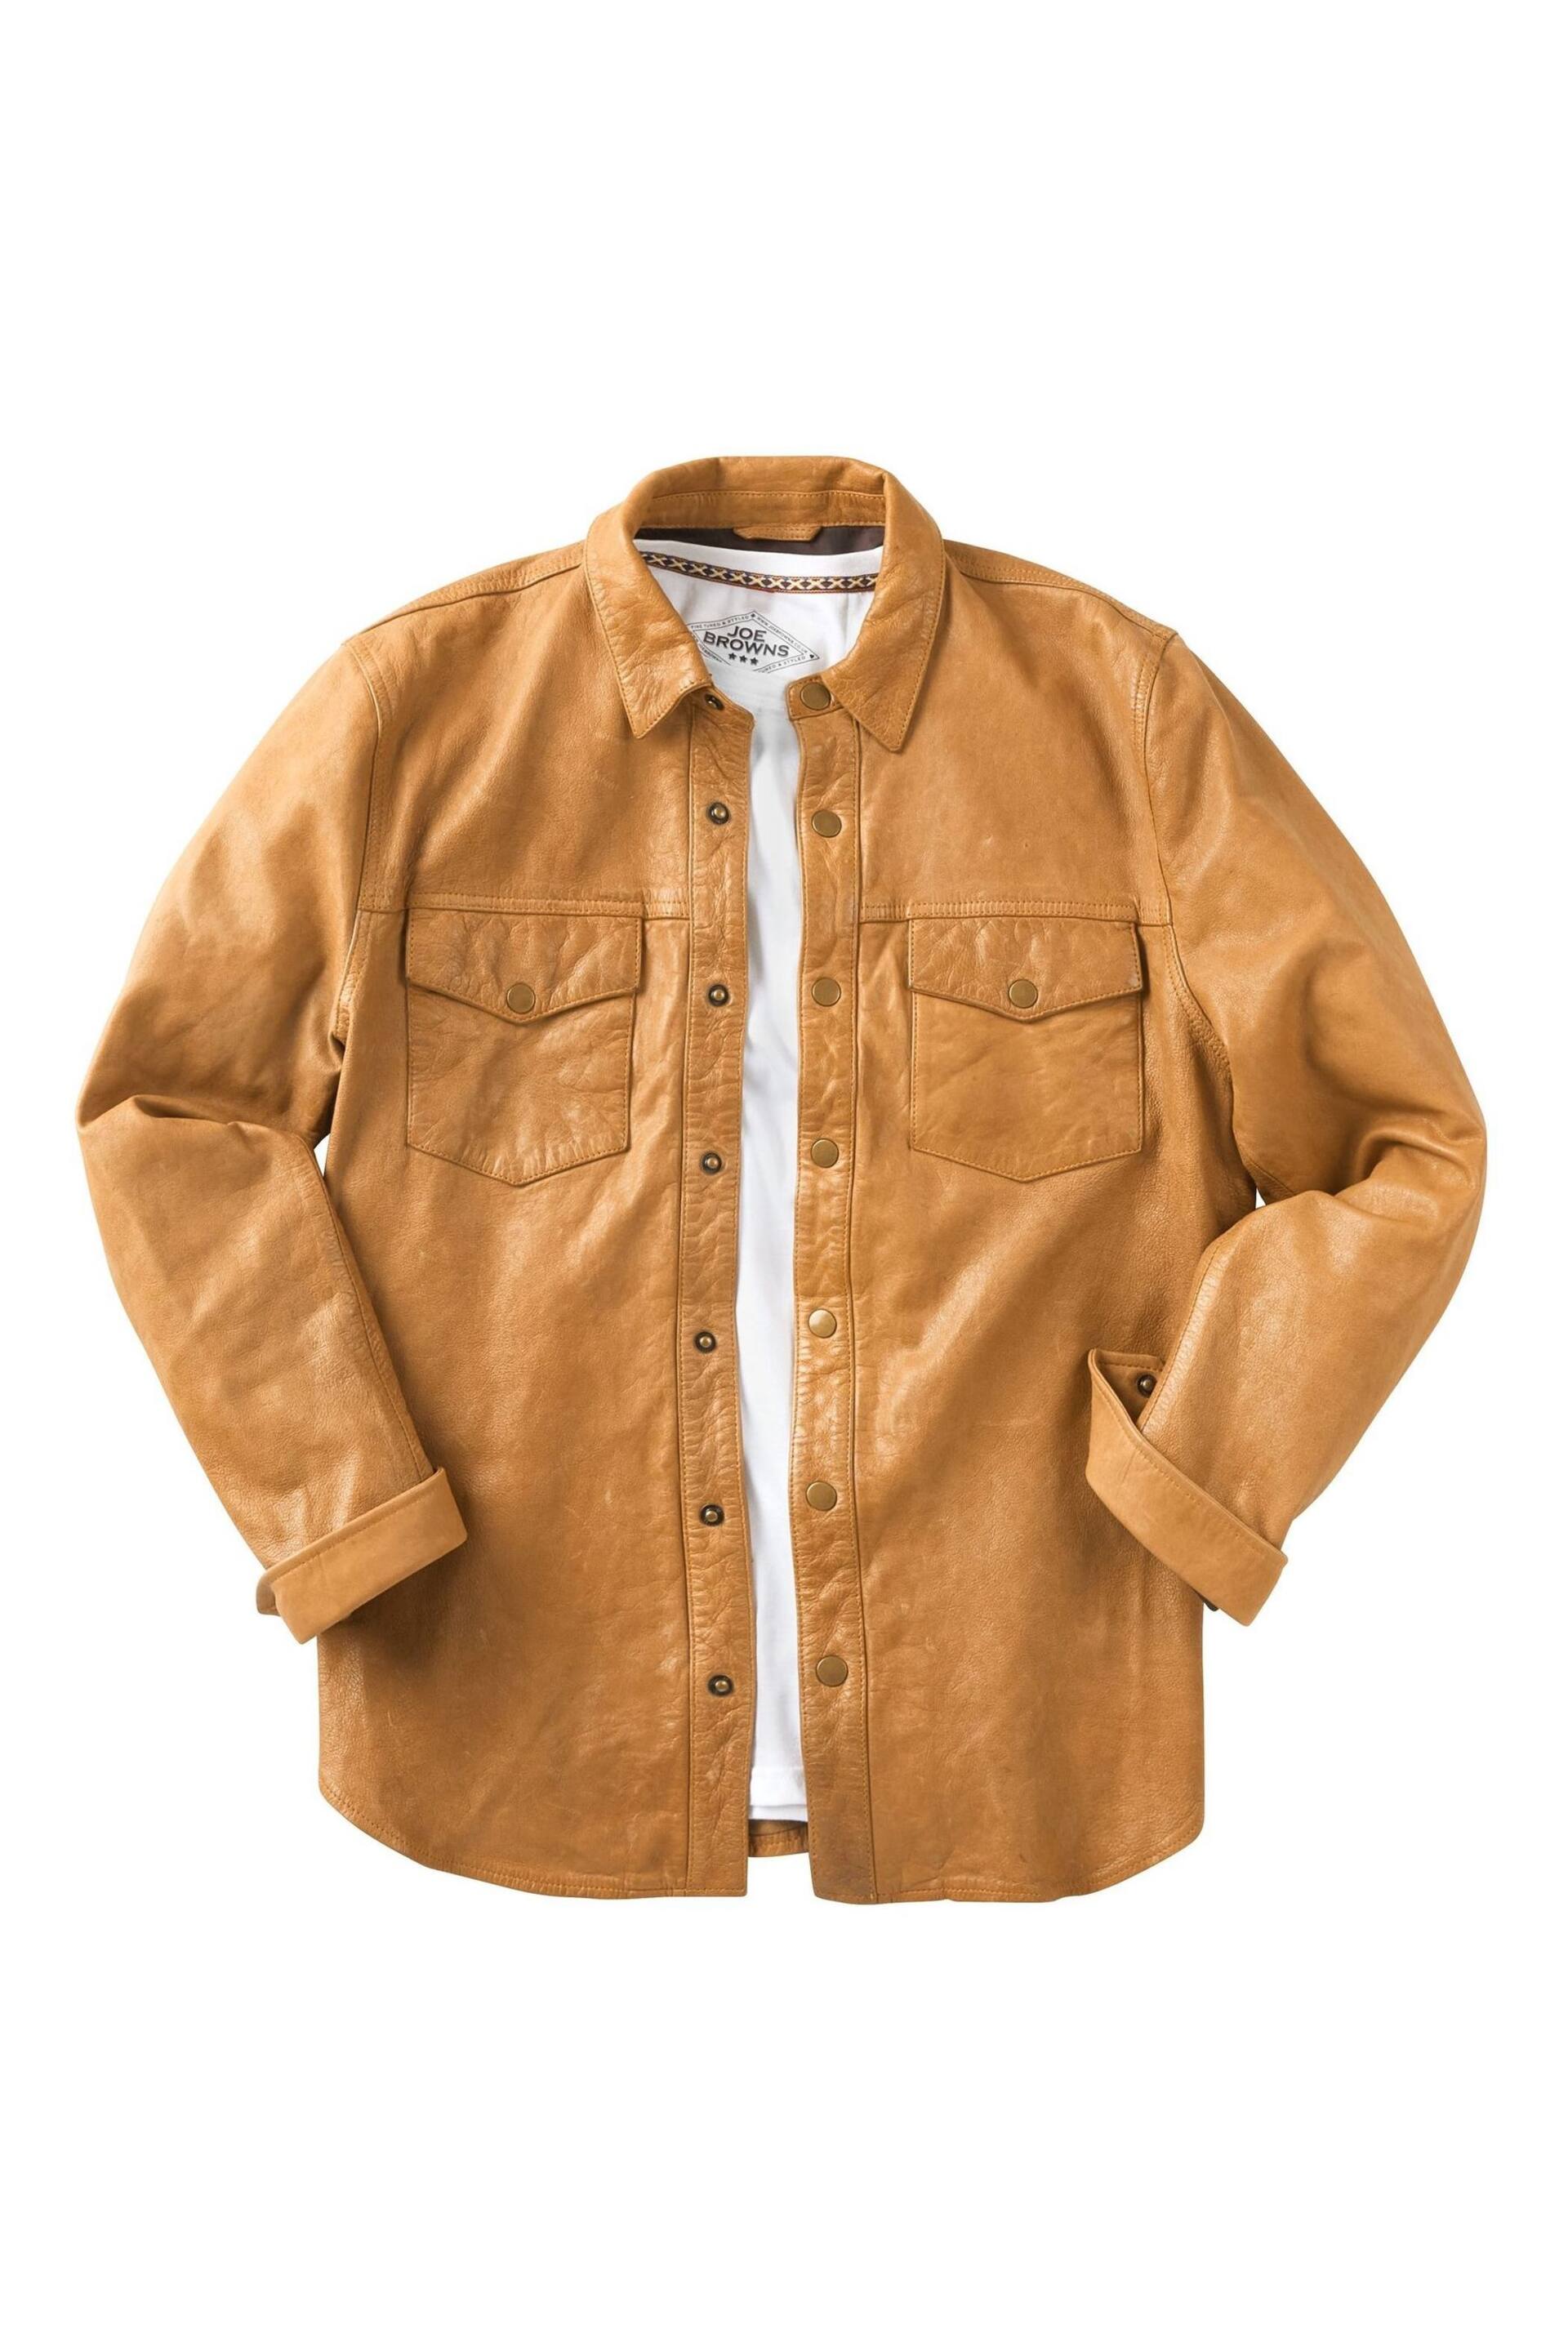 Joe Browns Brown Western Style Leather Overshirt - Image 7 of 7